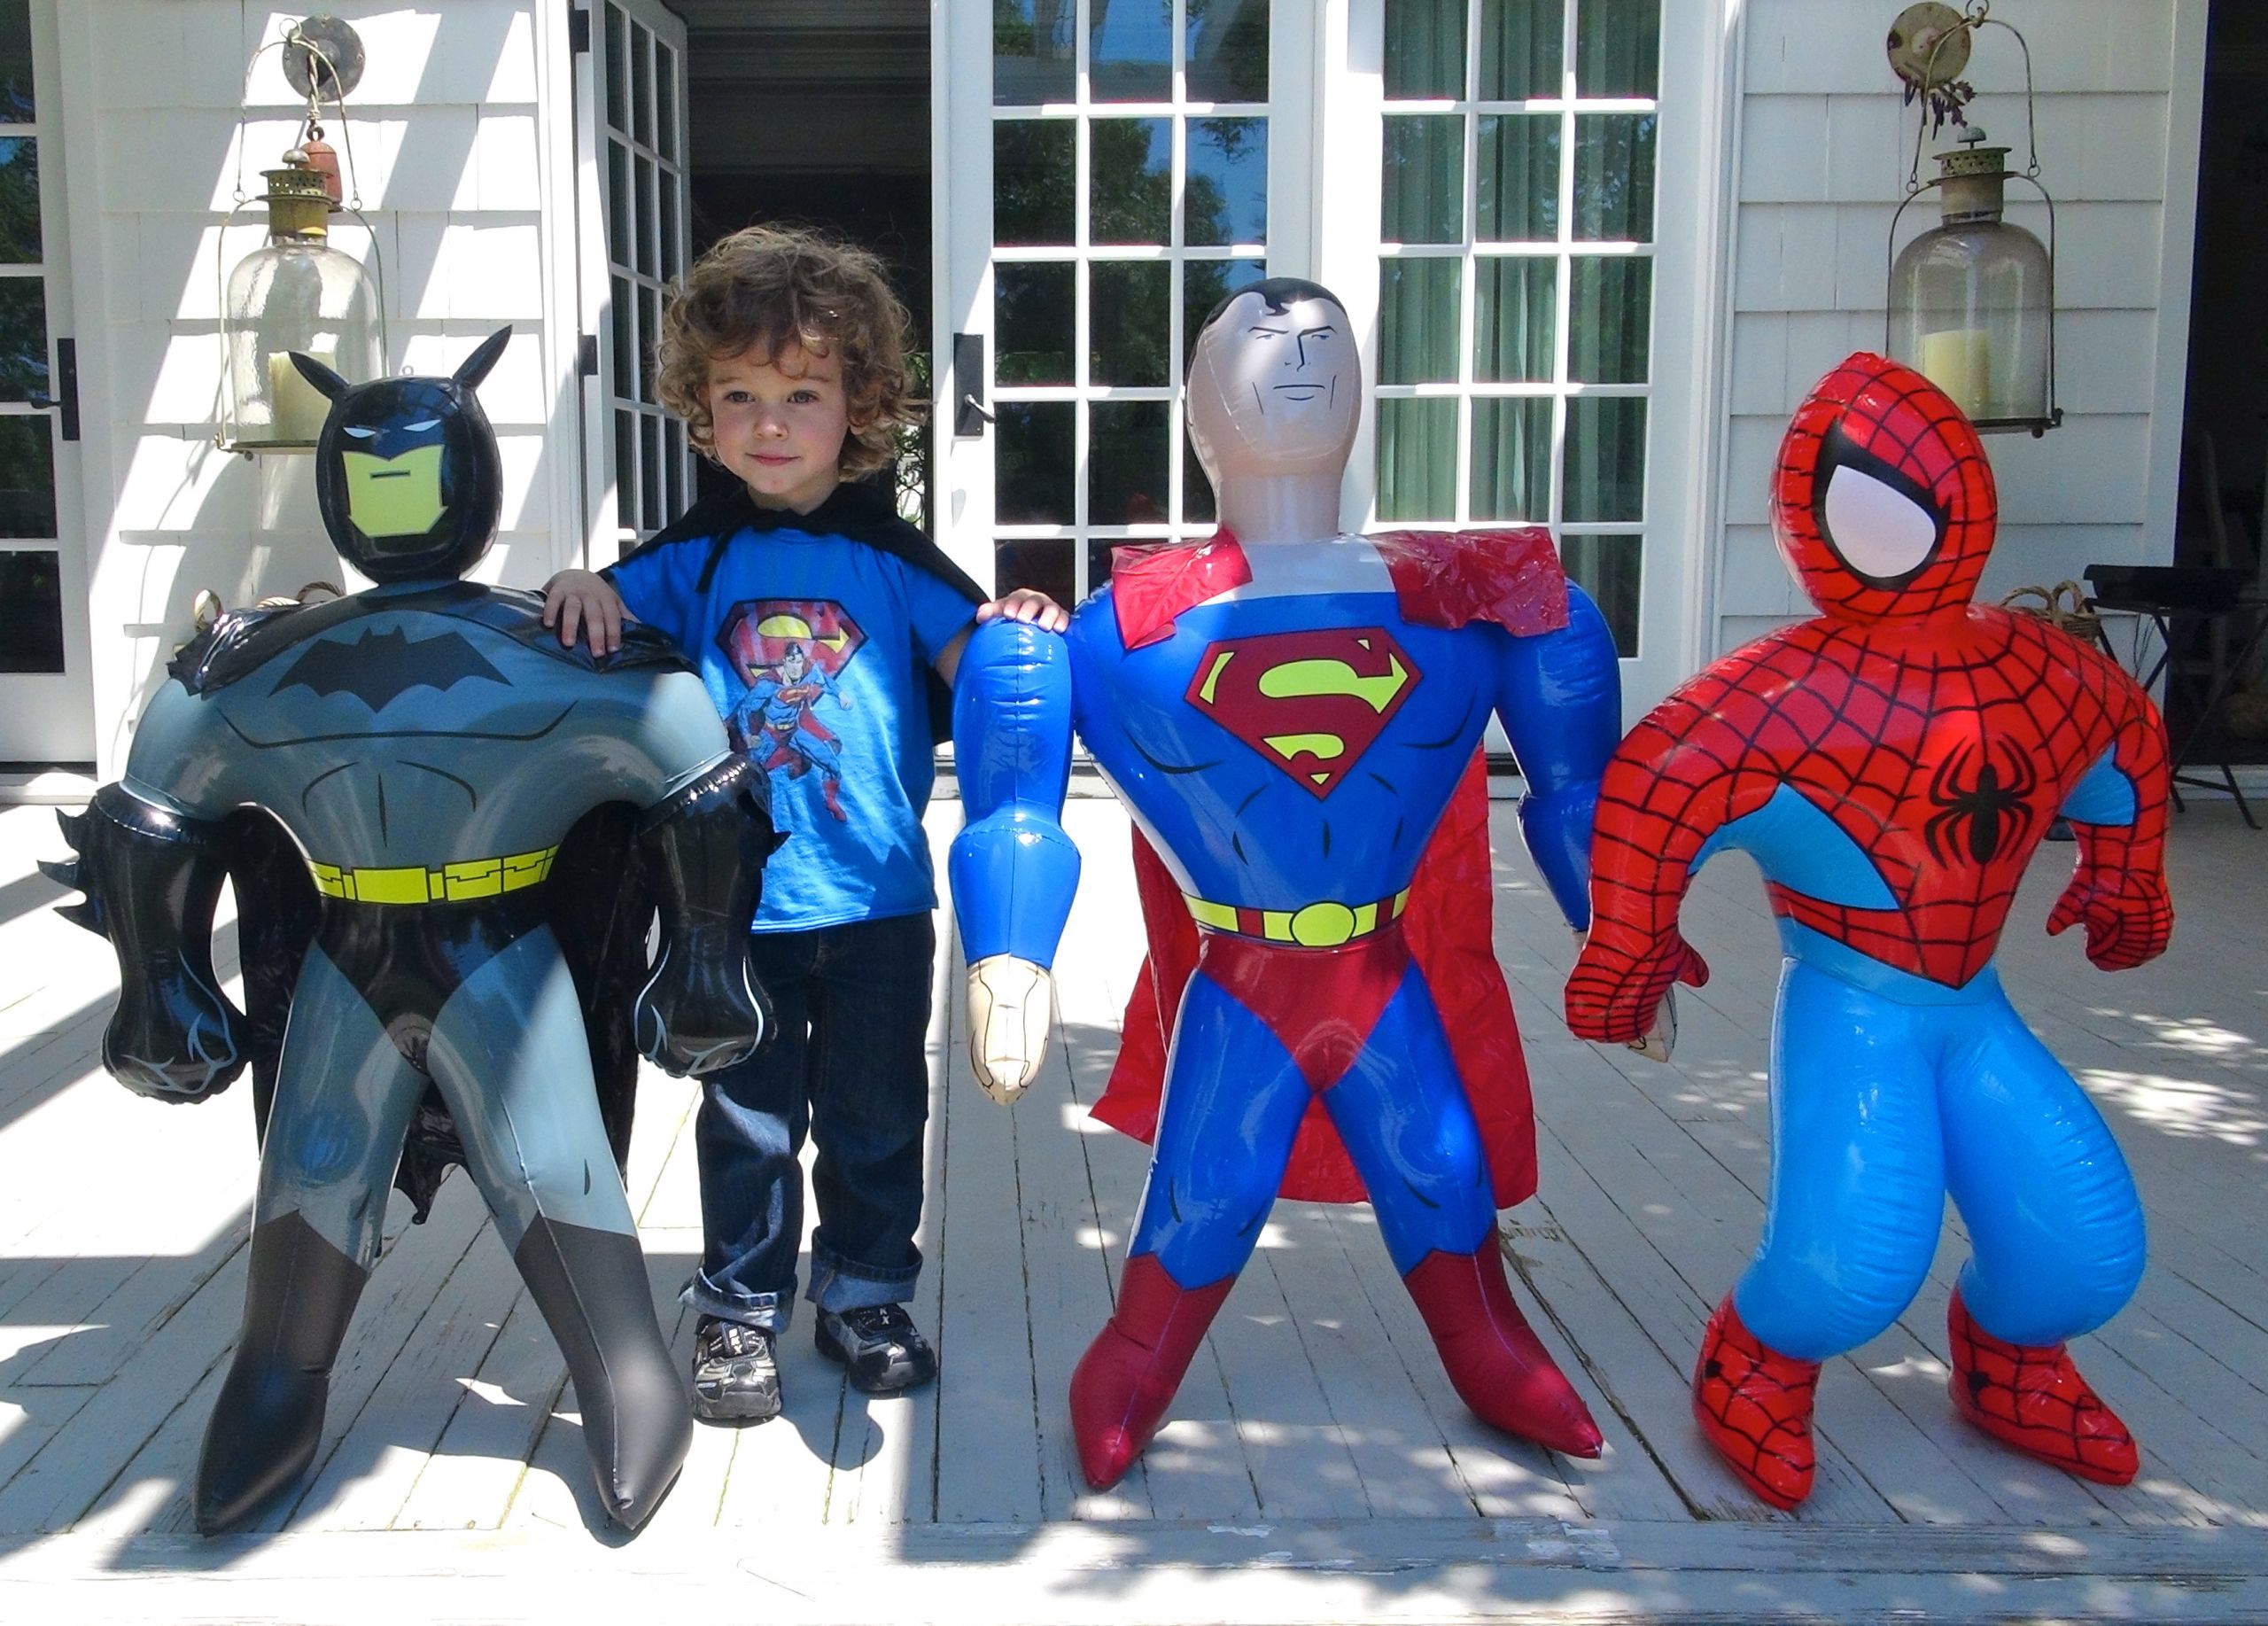 Superheroes Halloween Party Ideas
 How To Plan A Superhero Halloween Party For Kids KDHamptons